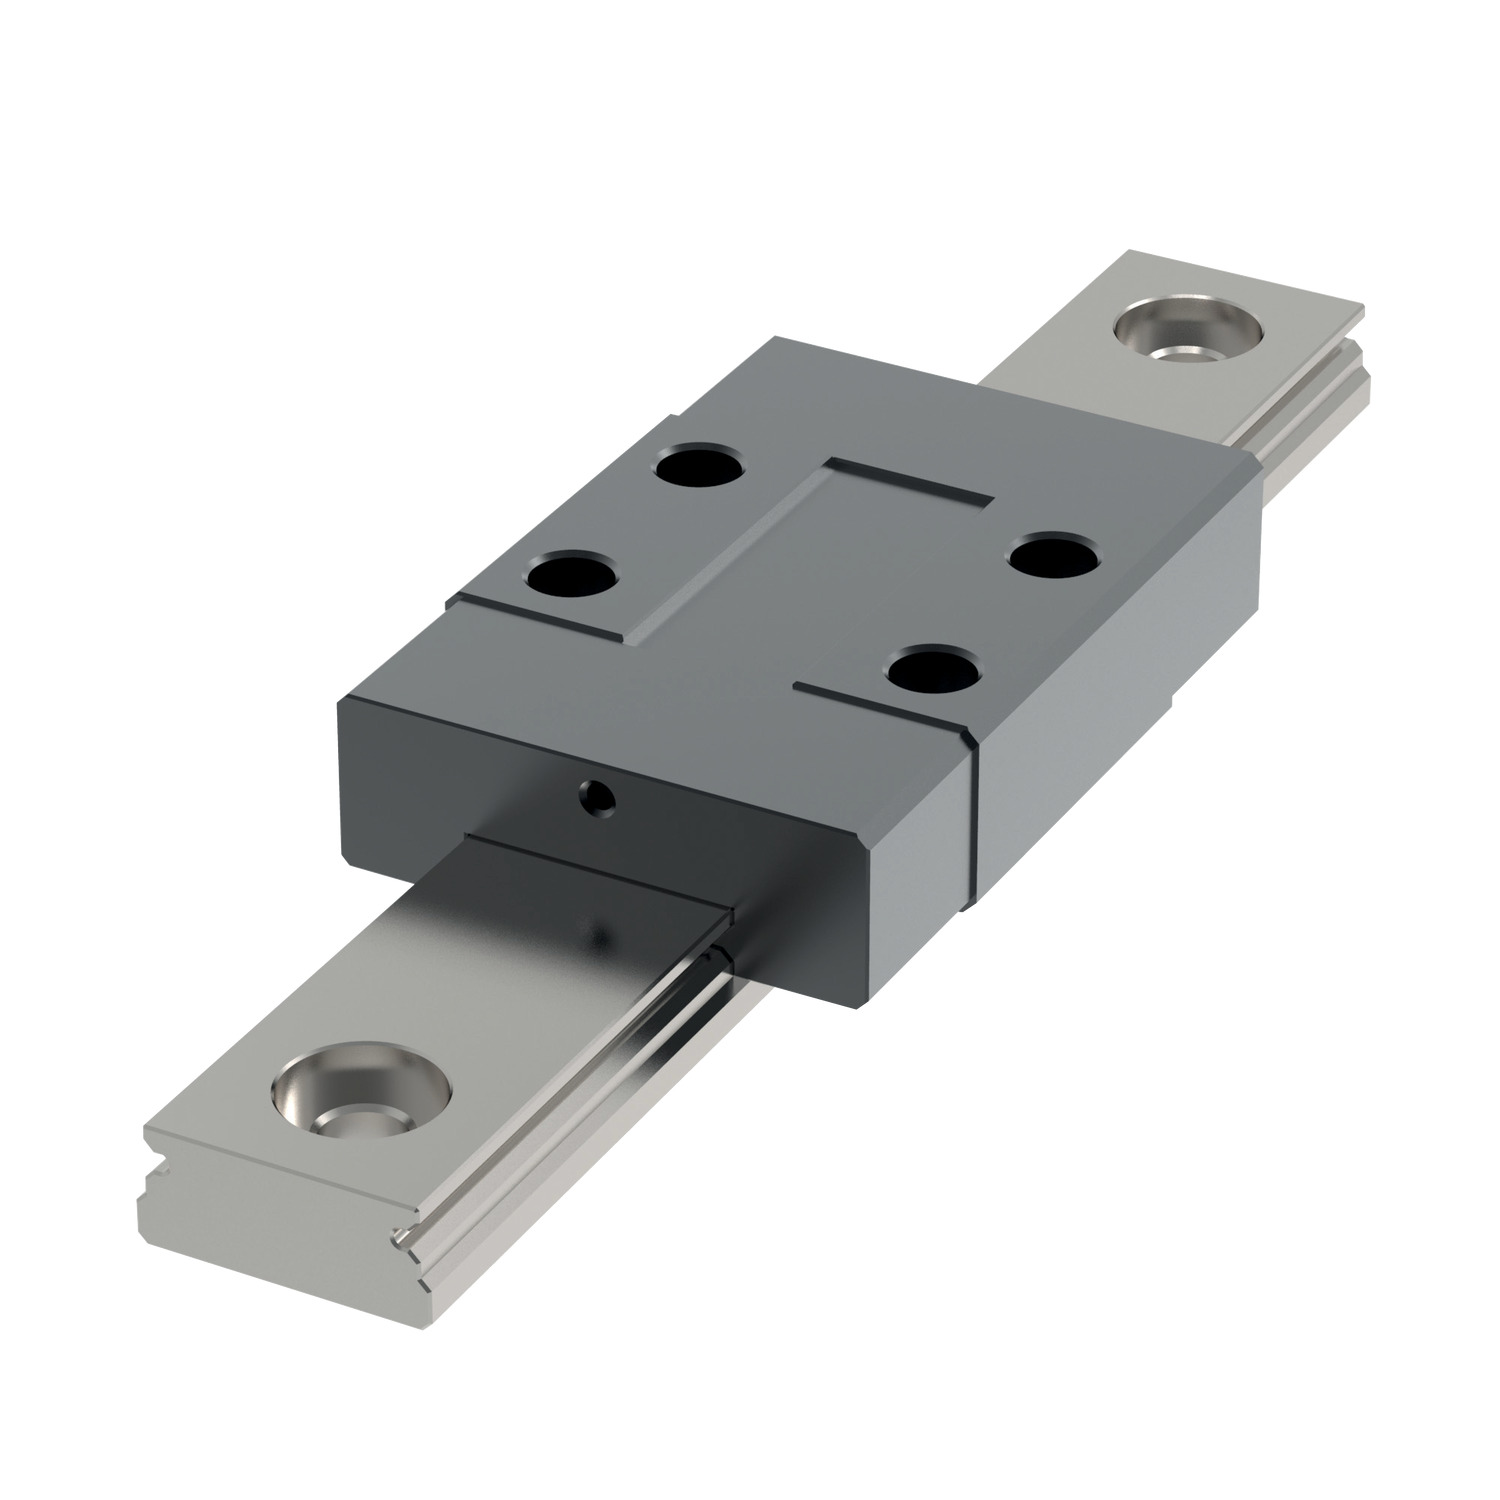 Miniature Linear Guideways We also stock a wide range of hardened stainless steel linear guideways for applications in which space may be at a premium. Available in width sizes 5, 7, 9, 12, 15mm. Carriages (L1010.C) and clamps (L1010.CL) are also in stock.